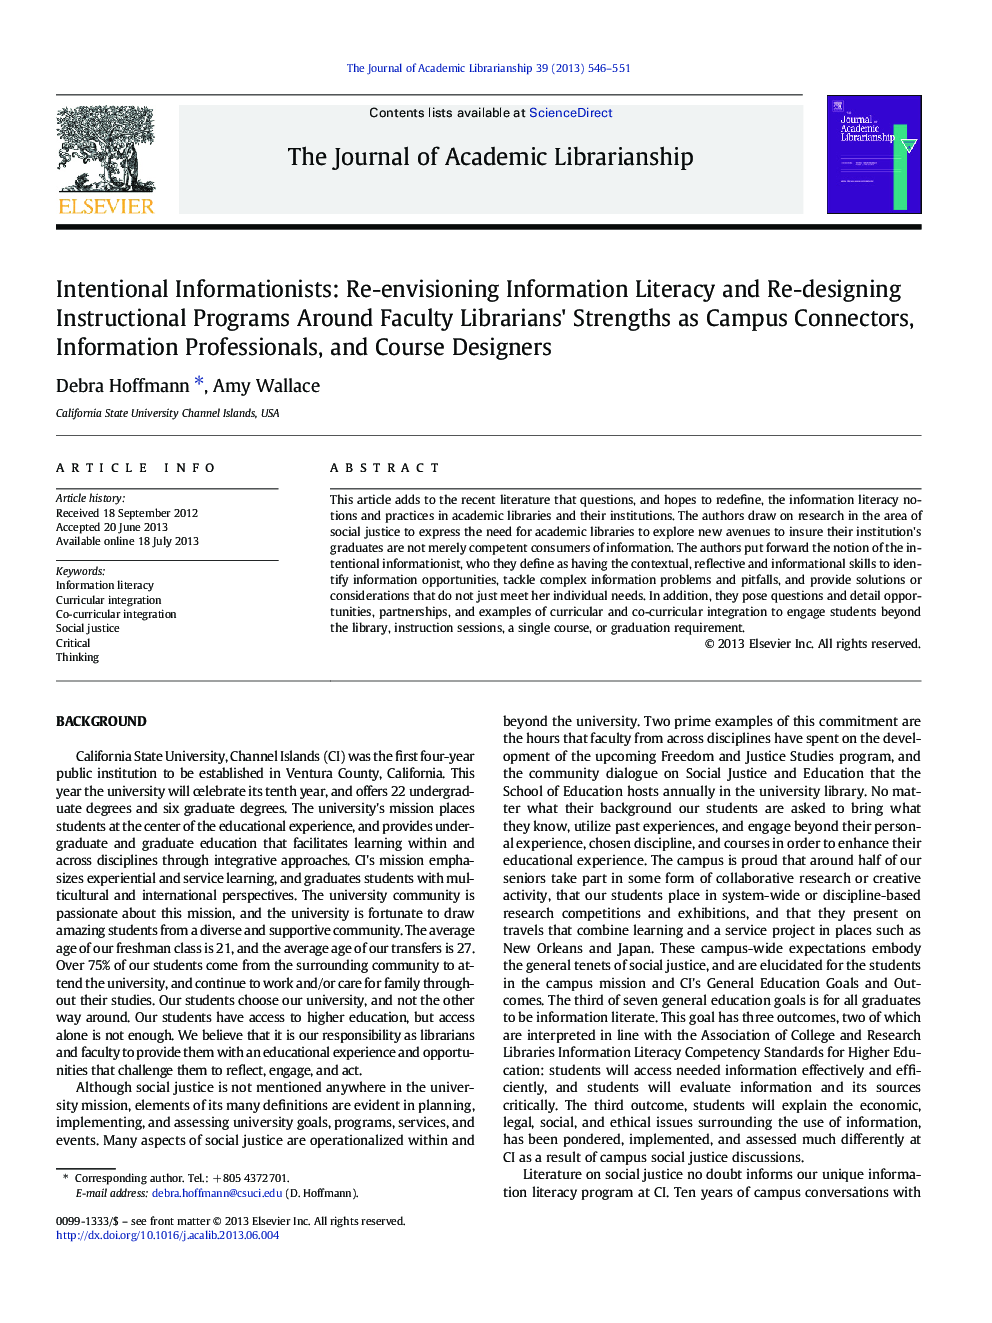 Intentional Informationists: Re-envisioning Information Literacy and Re-designing Instructional Programs Around Faculty Librarians' Strengths as Campus Connectors, Information Professionals, and Course Designers